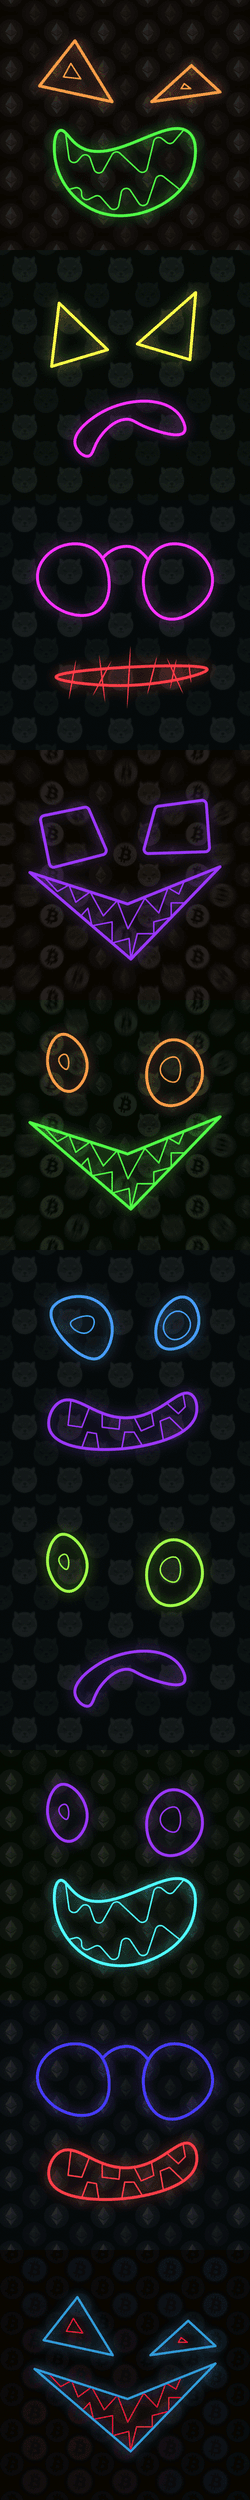 Crypto Digger Faces collection image